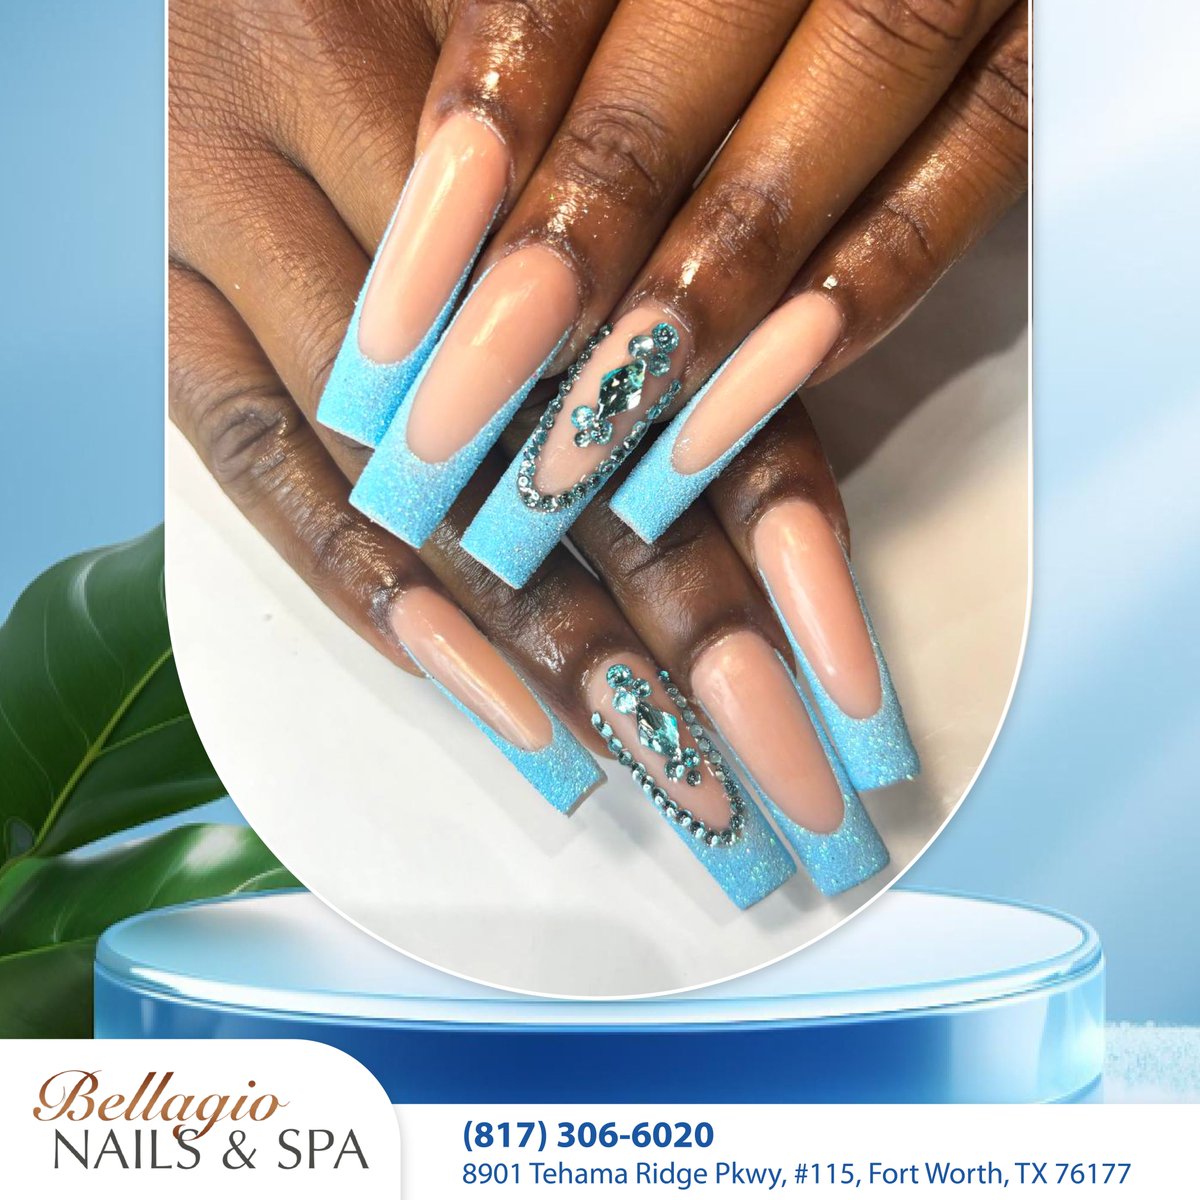 ✨🩵 Something blue, but always chic! 🩵✨ Blue French nails are a timeless and elegant way to add a pop of color to your fingertips.

#bellagionailspa #bellagiotx #bellagionails #bellagiofortworth #nailsalonfortworth #nailsalontx #nail #nailsoftheday #longnails #naildesign